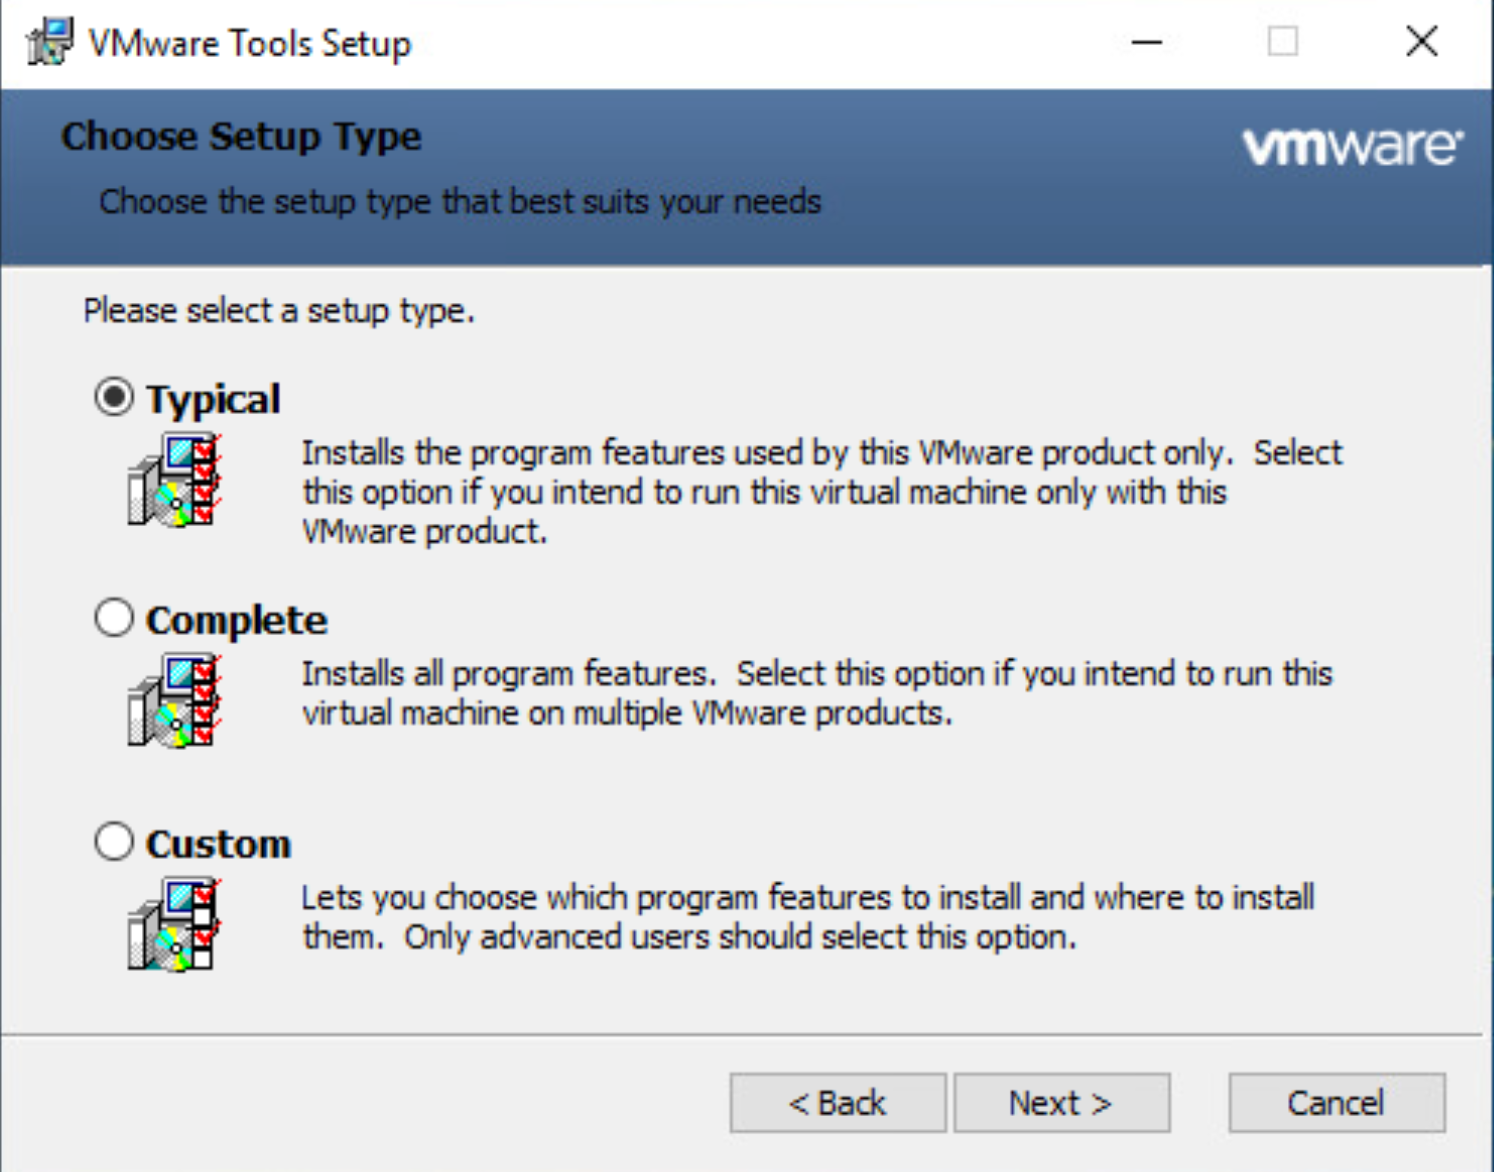 Screenshot of the VMware Tools Setup window where you select the "Typical" installation type.